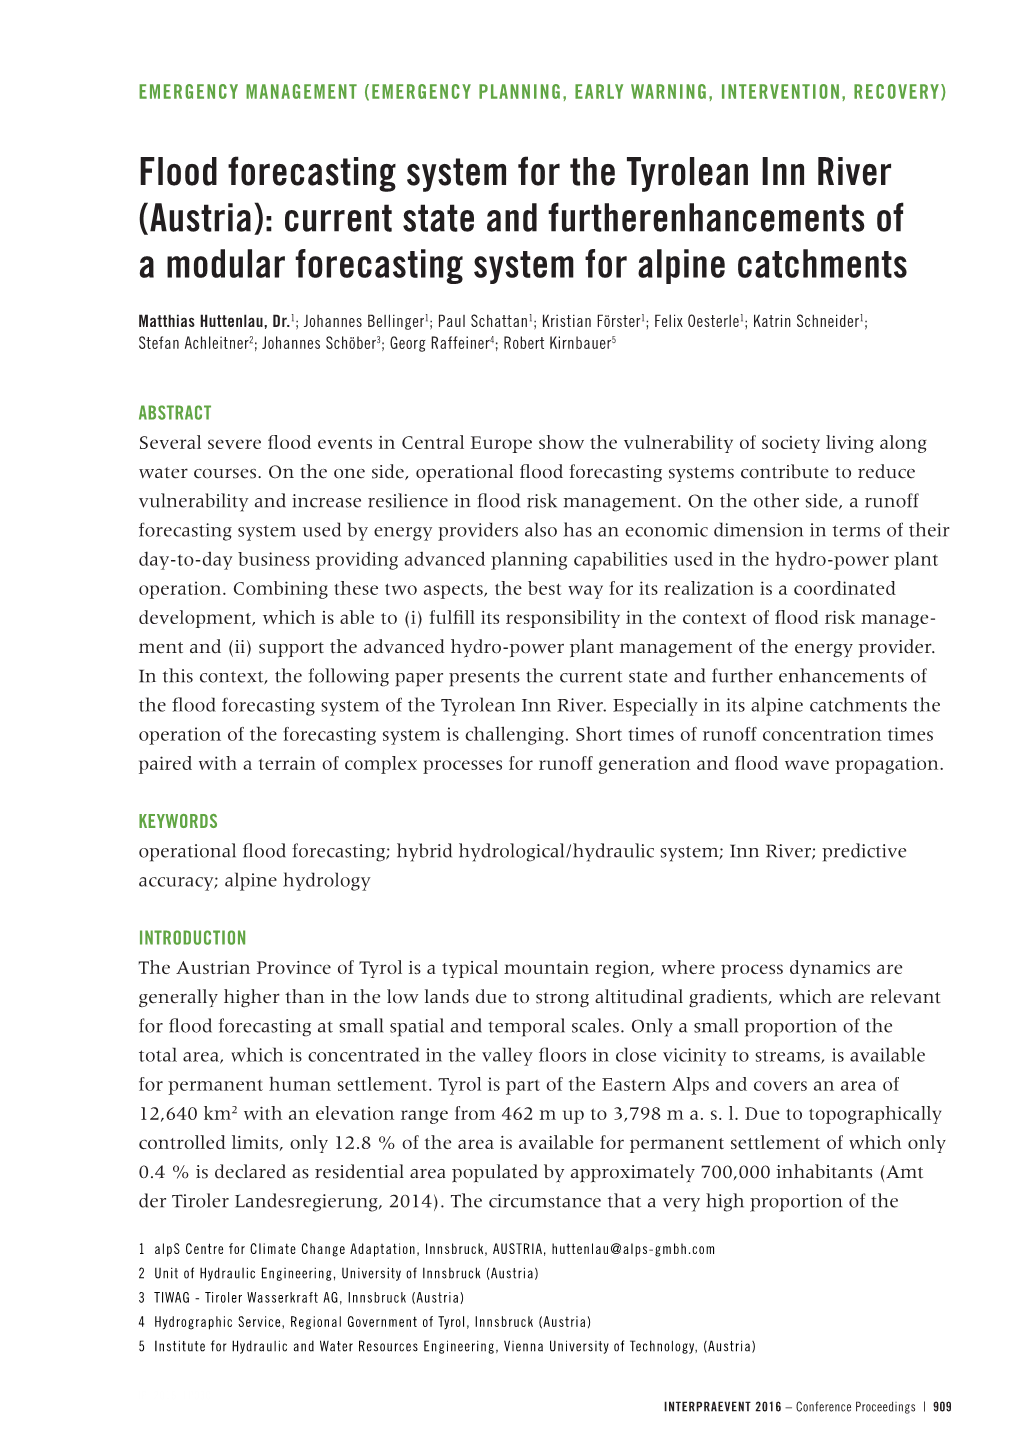 Flood Forecasting System for the Tyrolean Inn River (Austria): Current State and Furtherenhancements of a Modular Forecasting System for Alpine Catchments